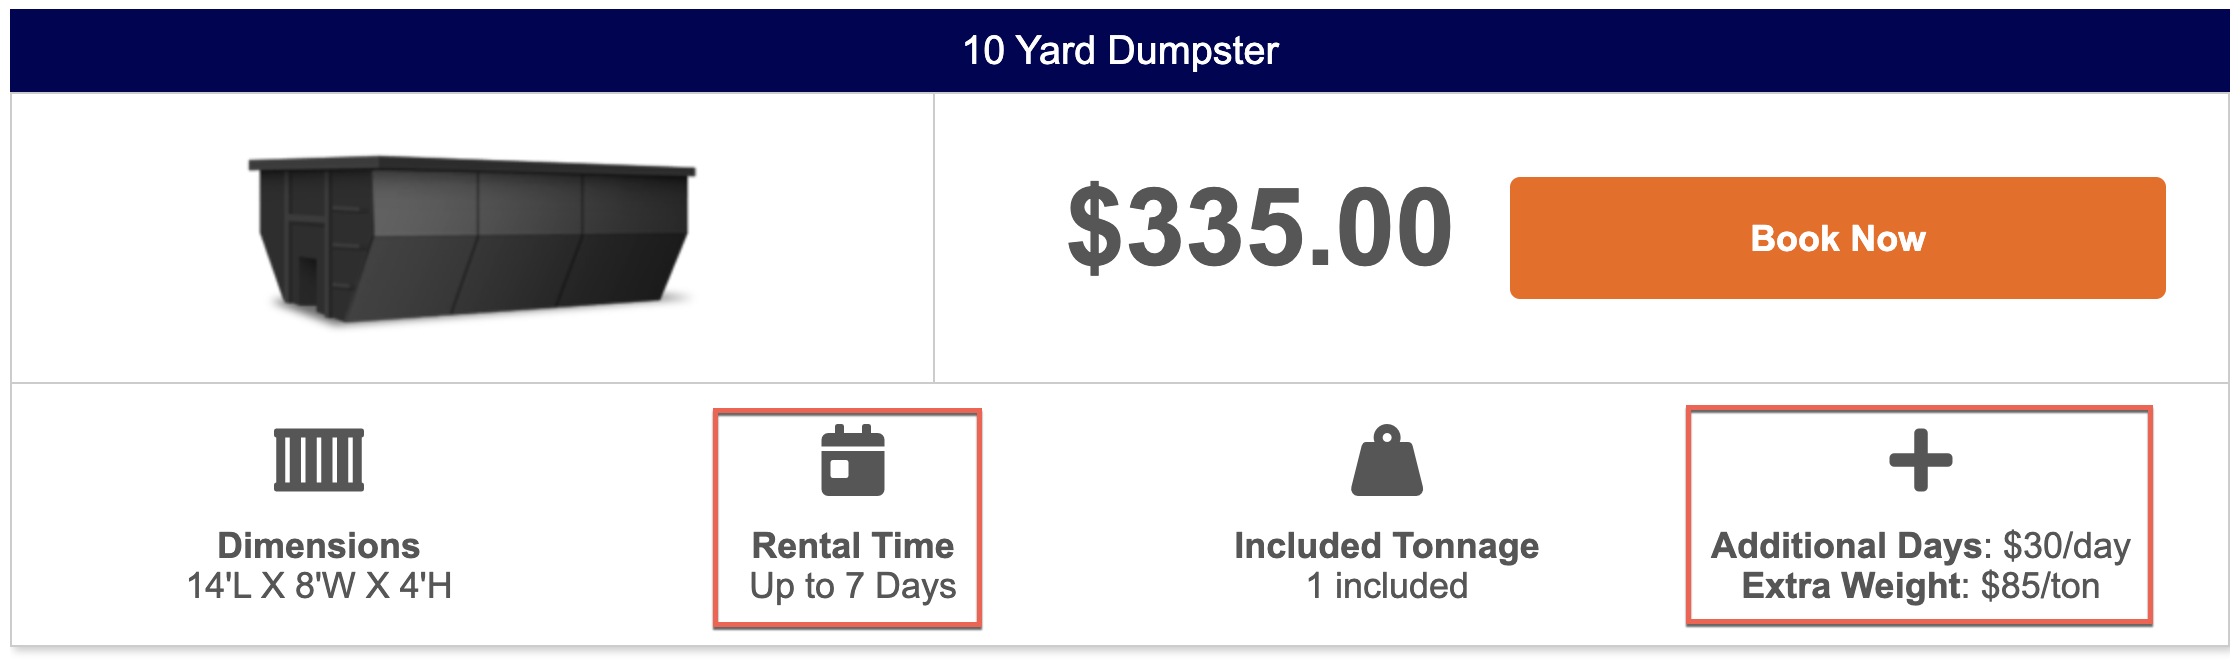 dumpster_daily_cost_website.png